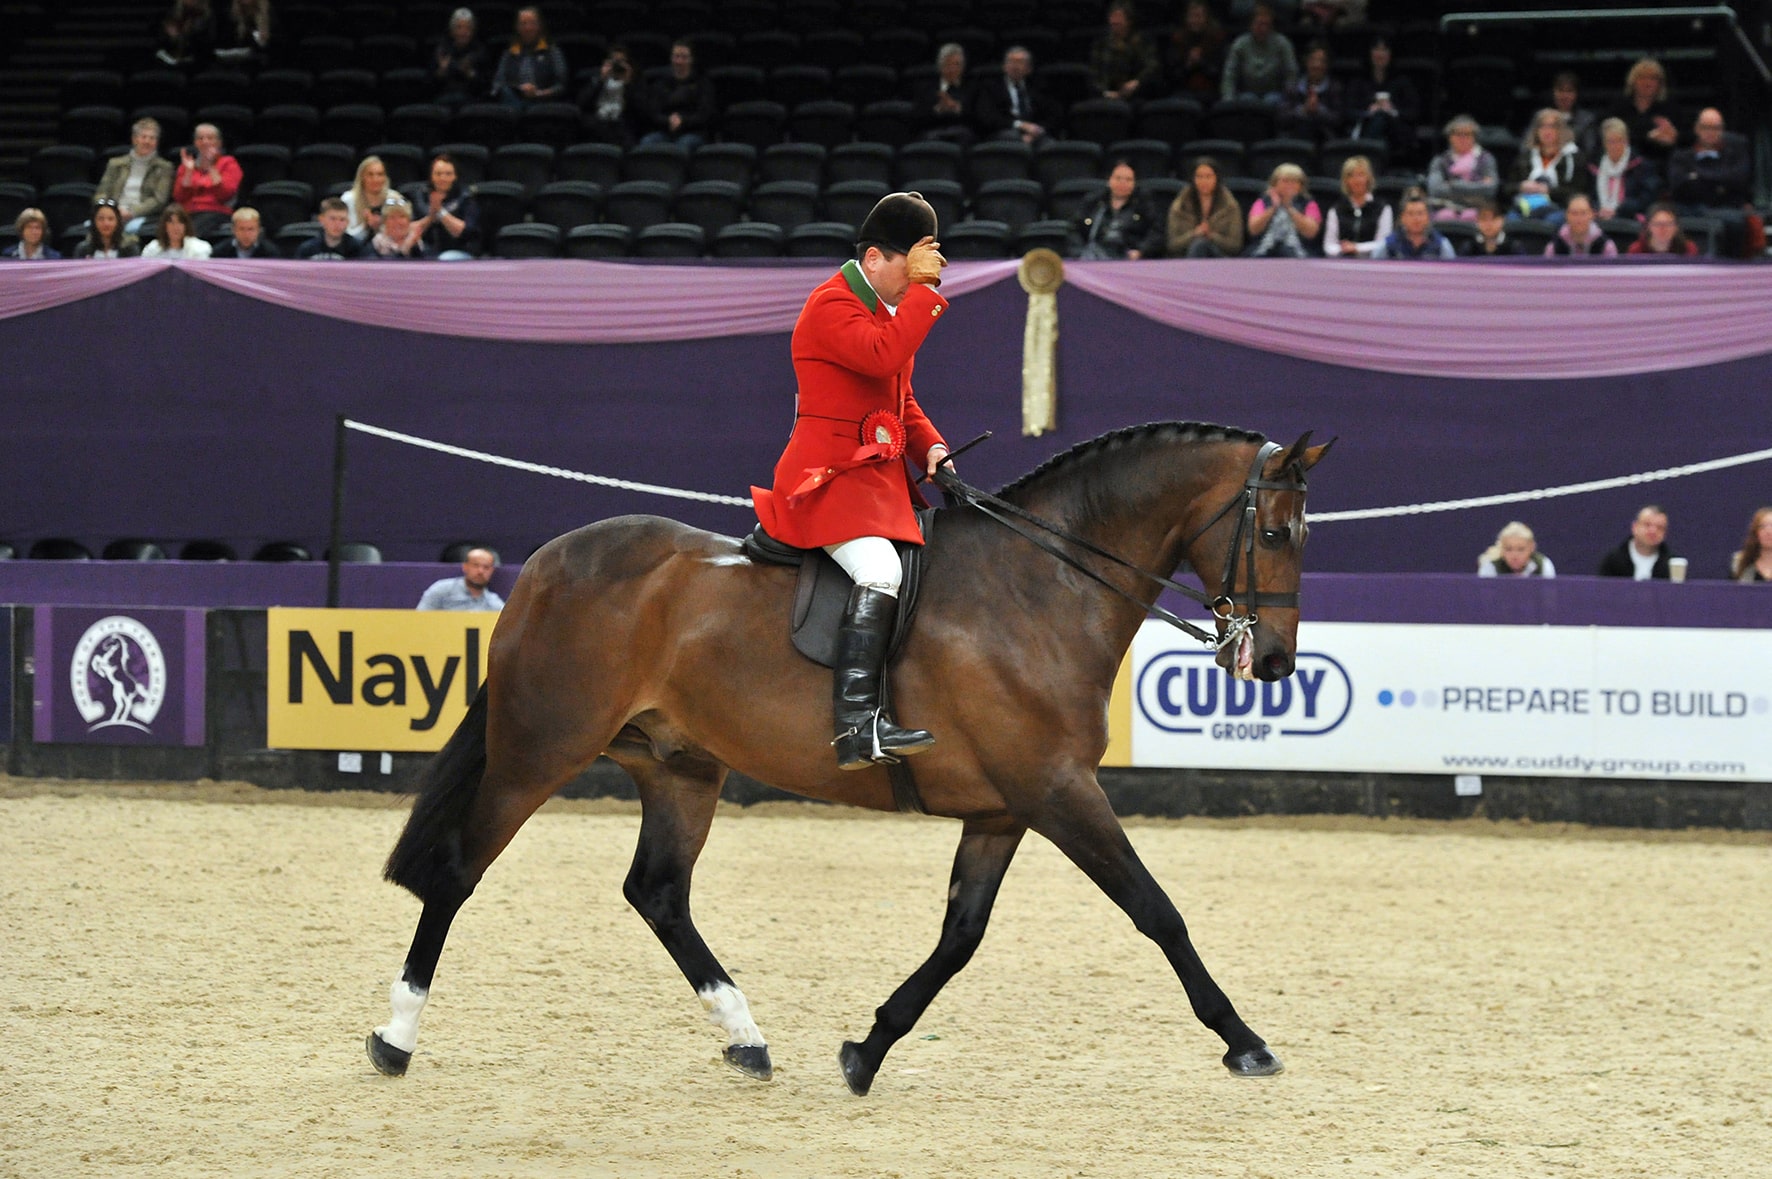 Vantage Point Champion Hunter of the Year ridden by Robert Walker and owned by Jill Day